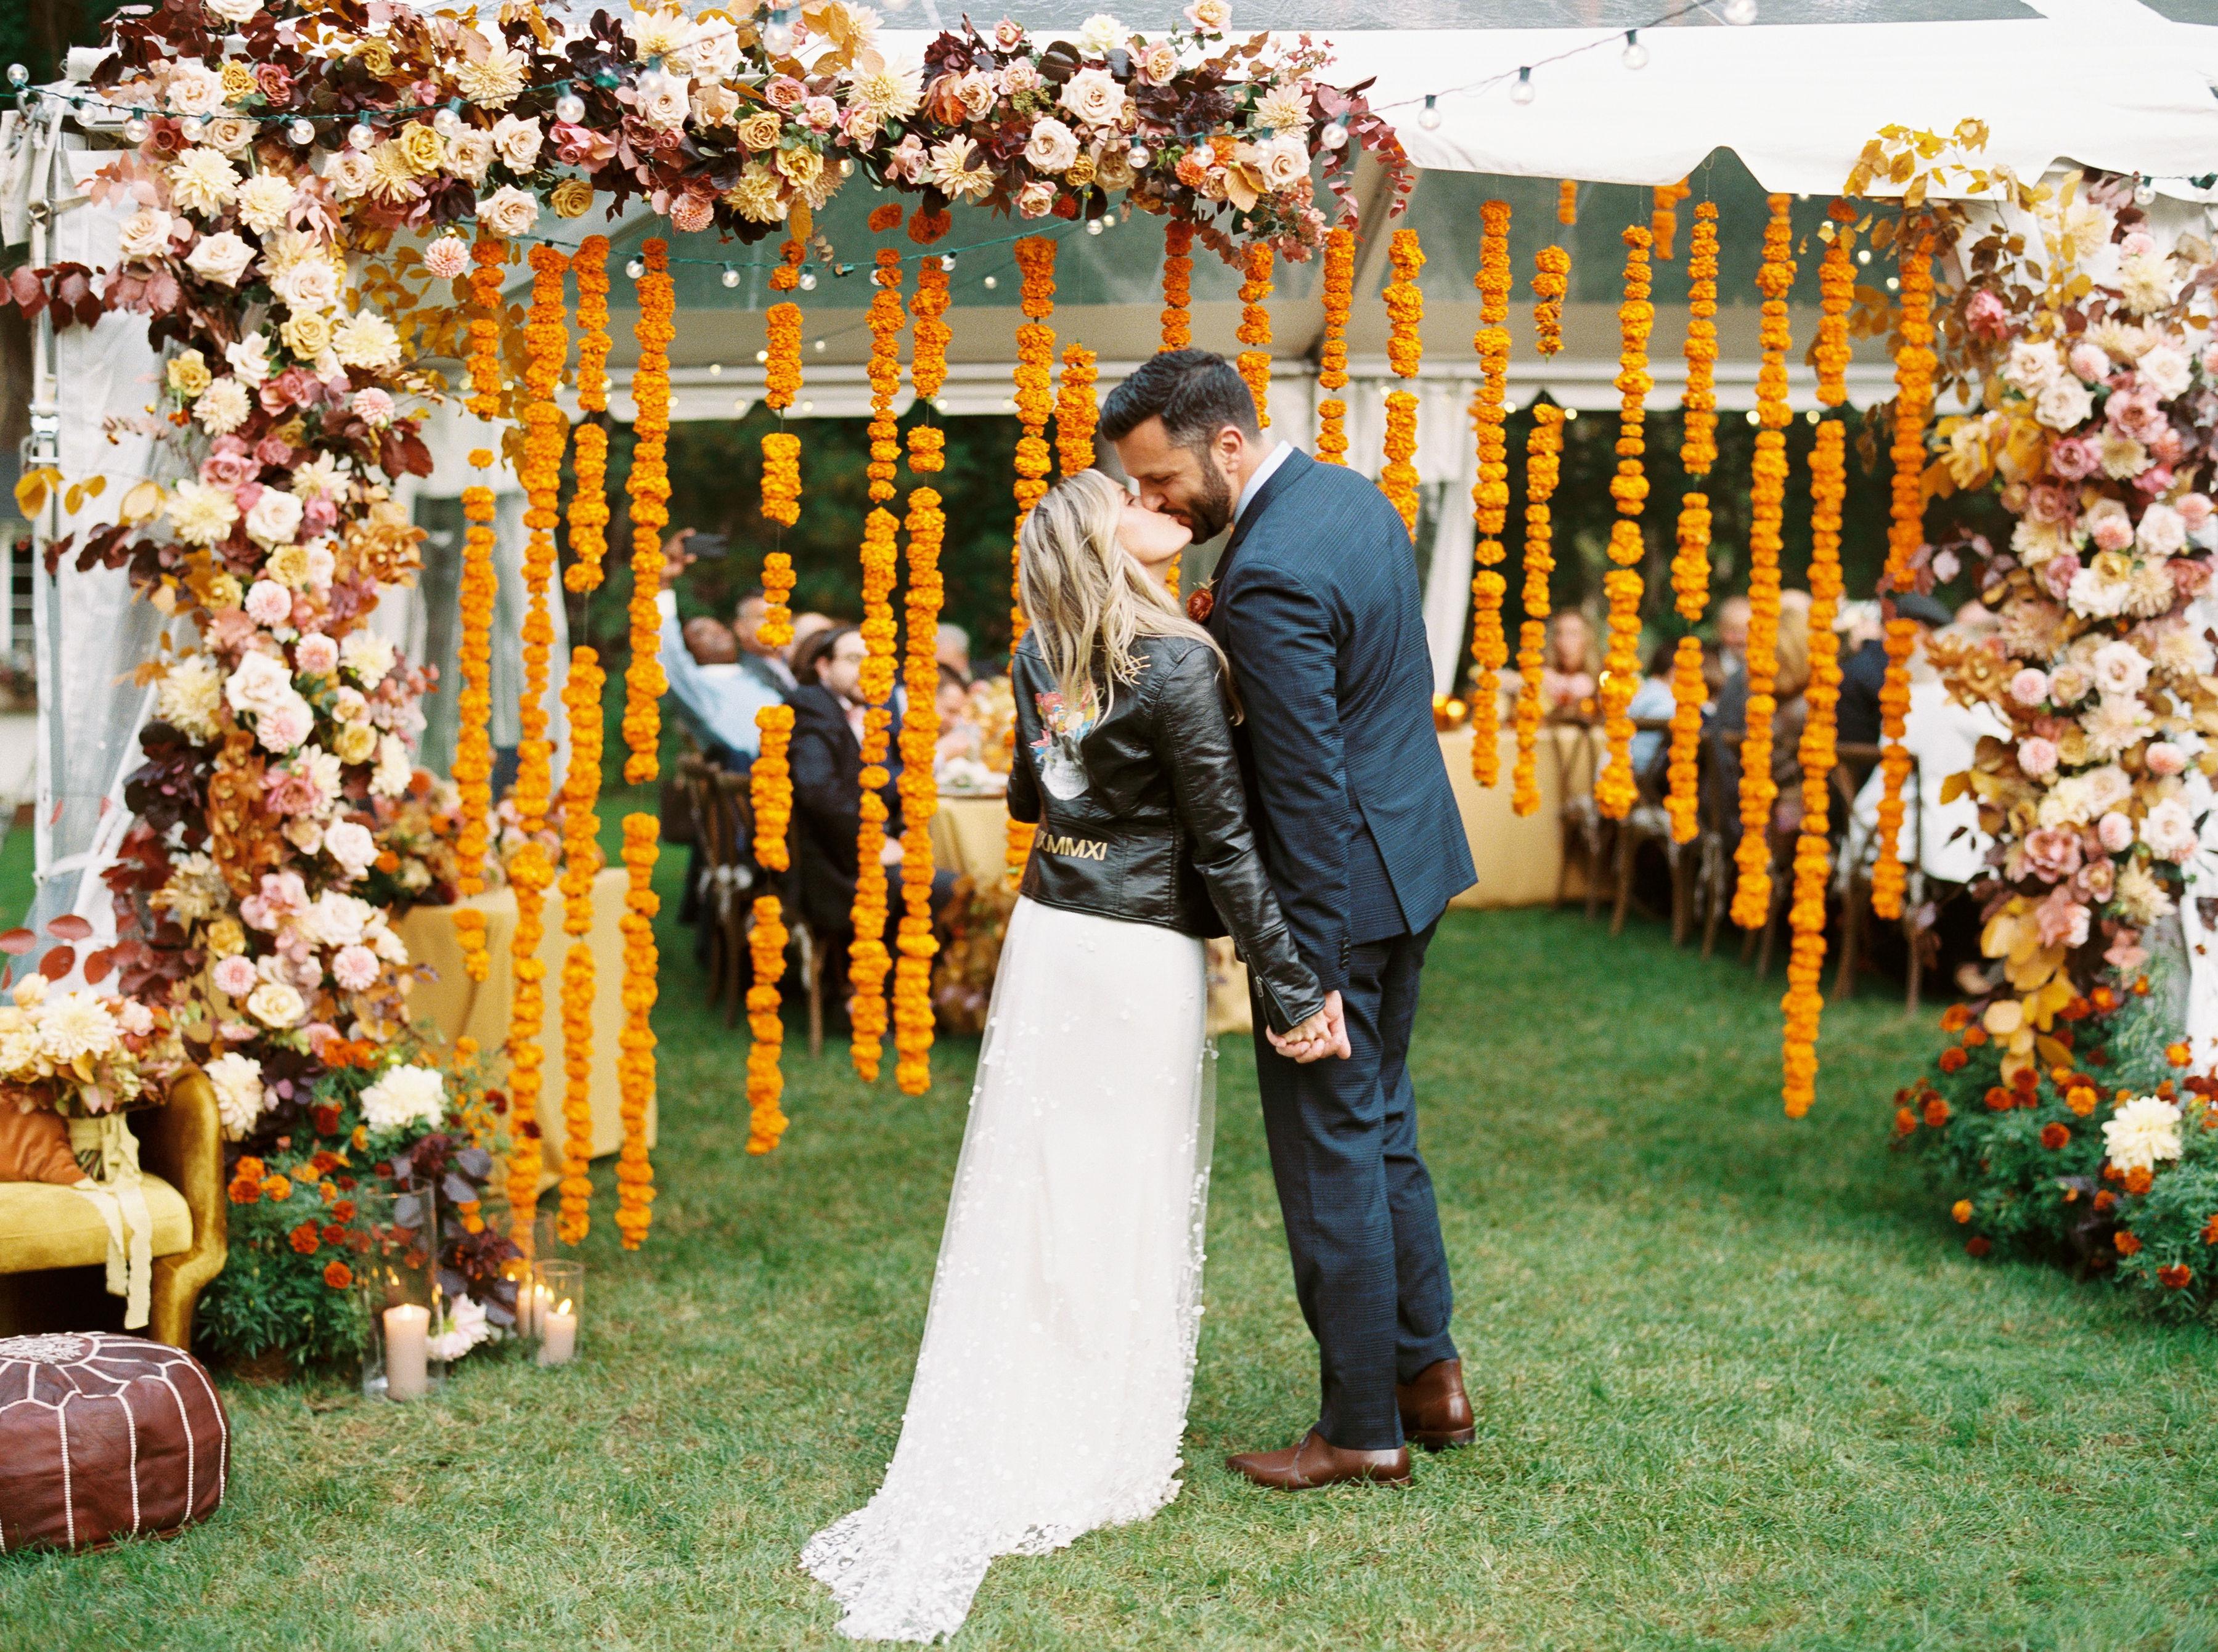 This Floral Designer Had The Boho Backyard Wedding Of Her Dreams